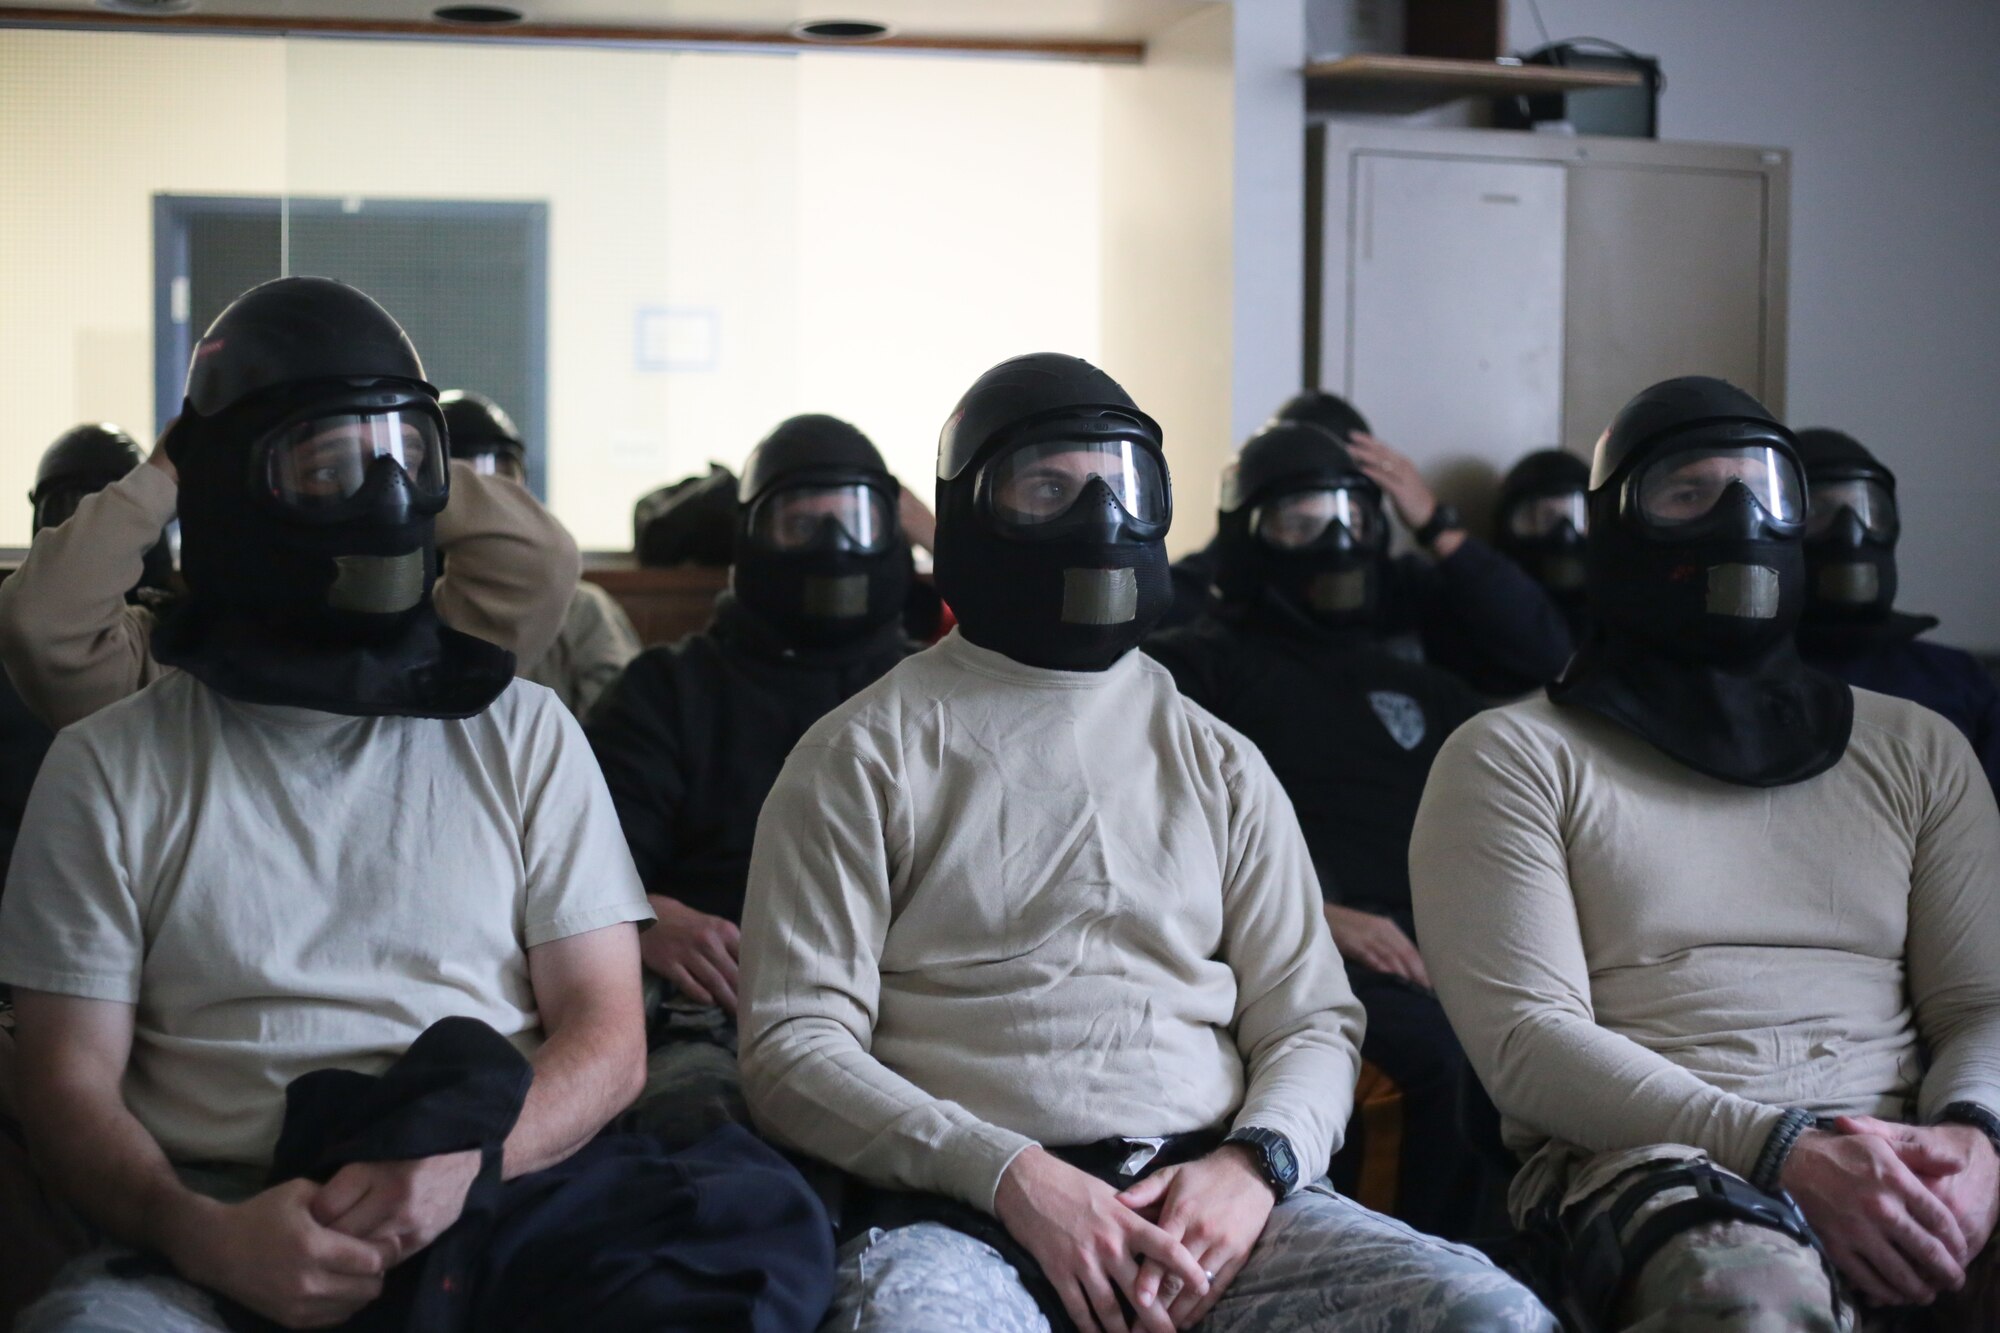 A picture of New Jersey Air National Guard, U.S. Coast Guard, and local law enforcement officers wearing protective gear during active shooter training.